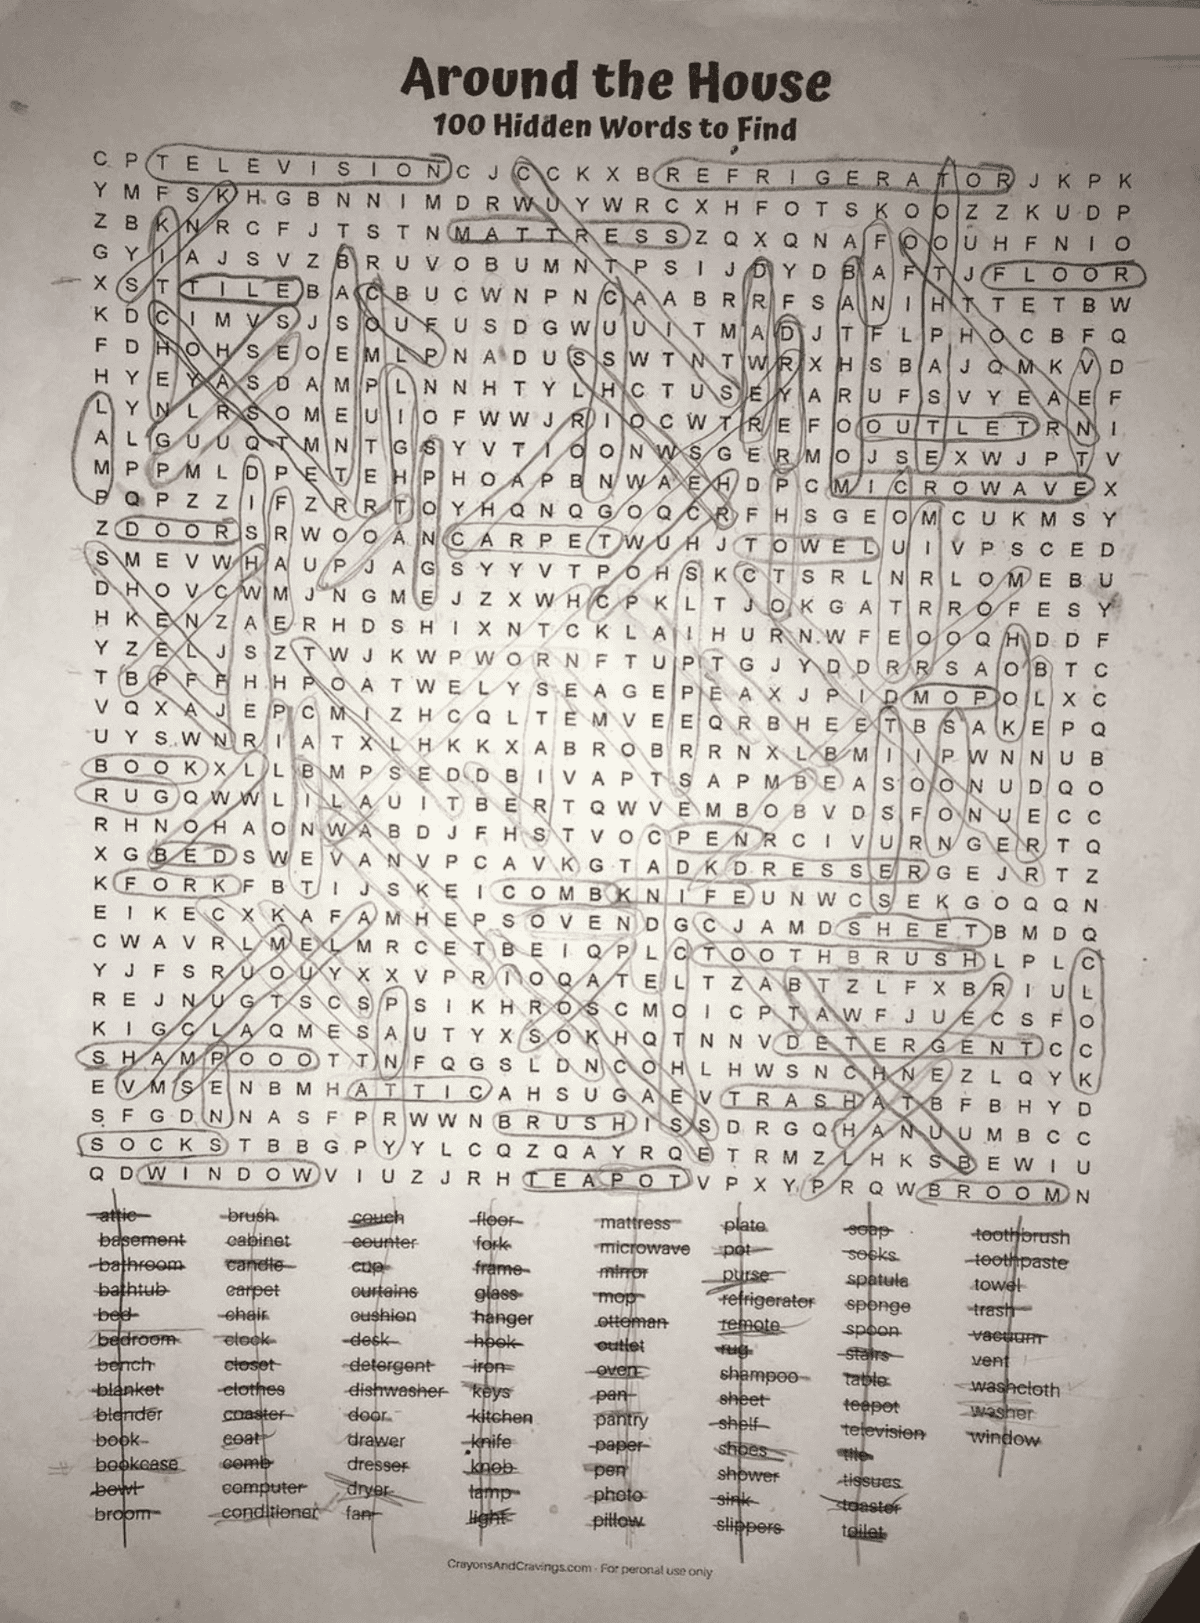 Answer key with all 100 words circled.